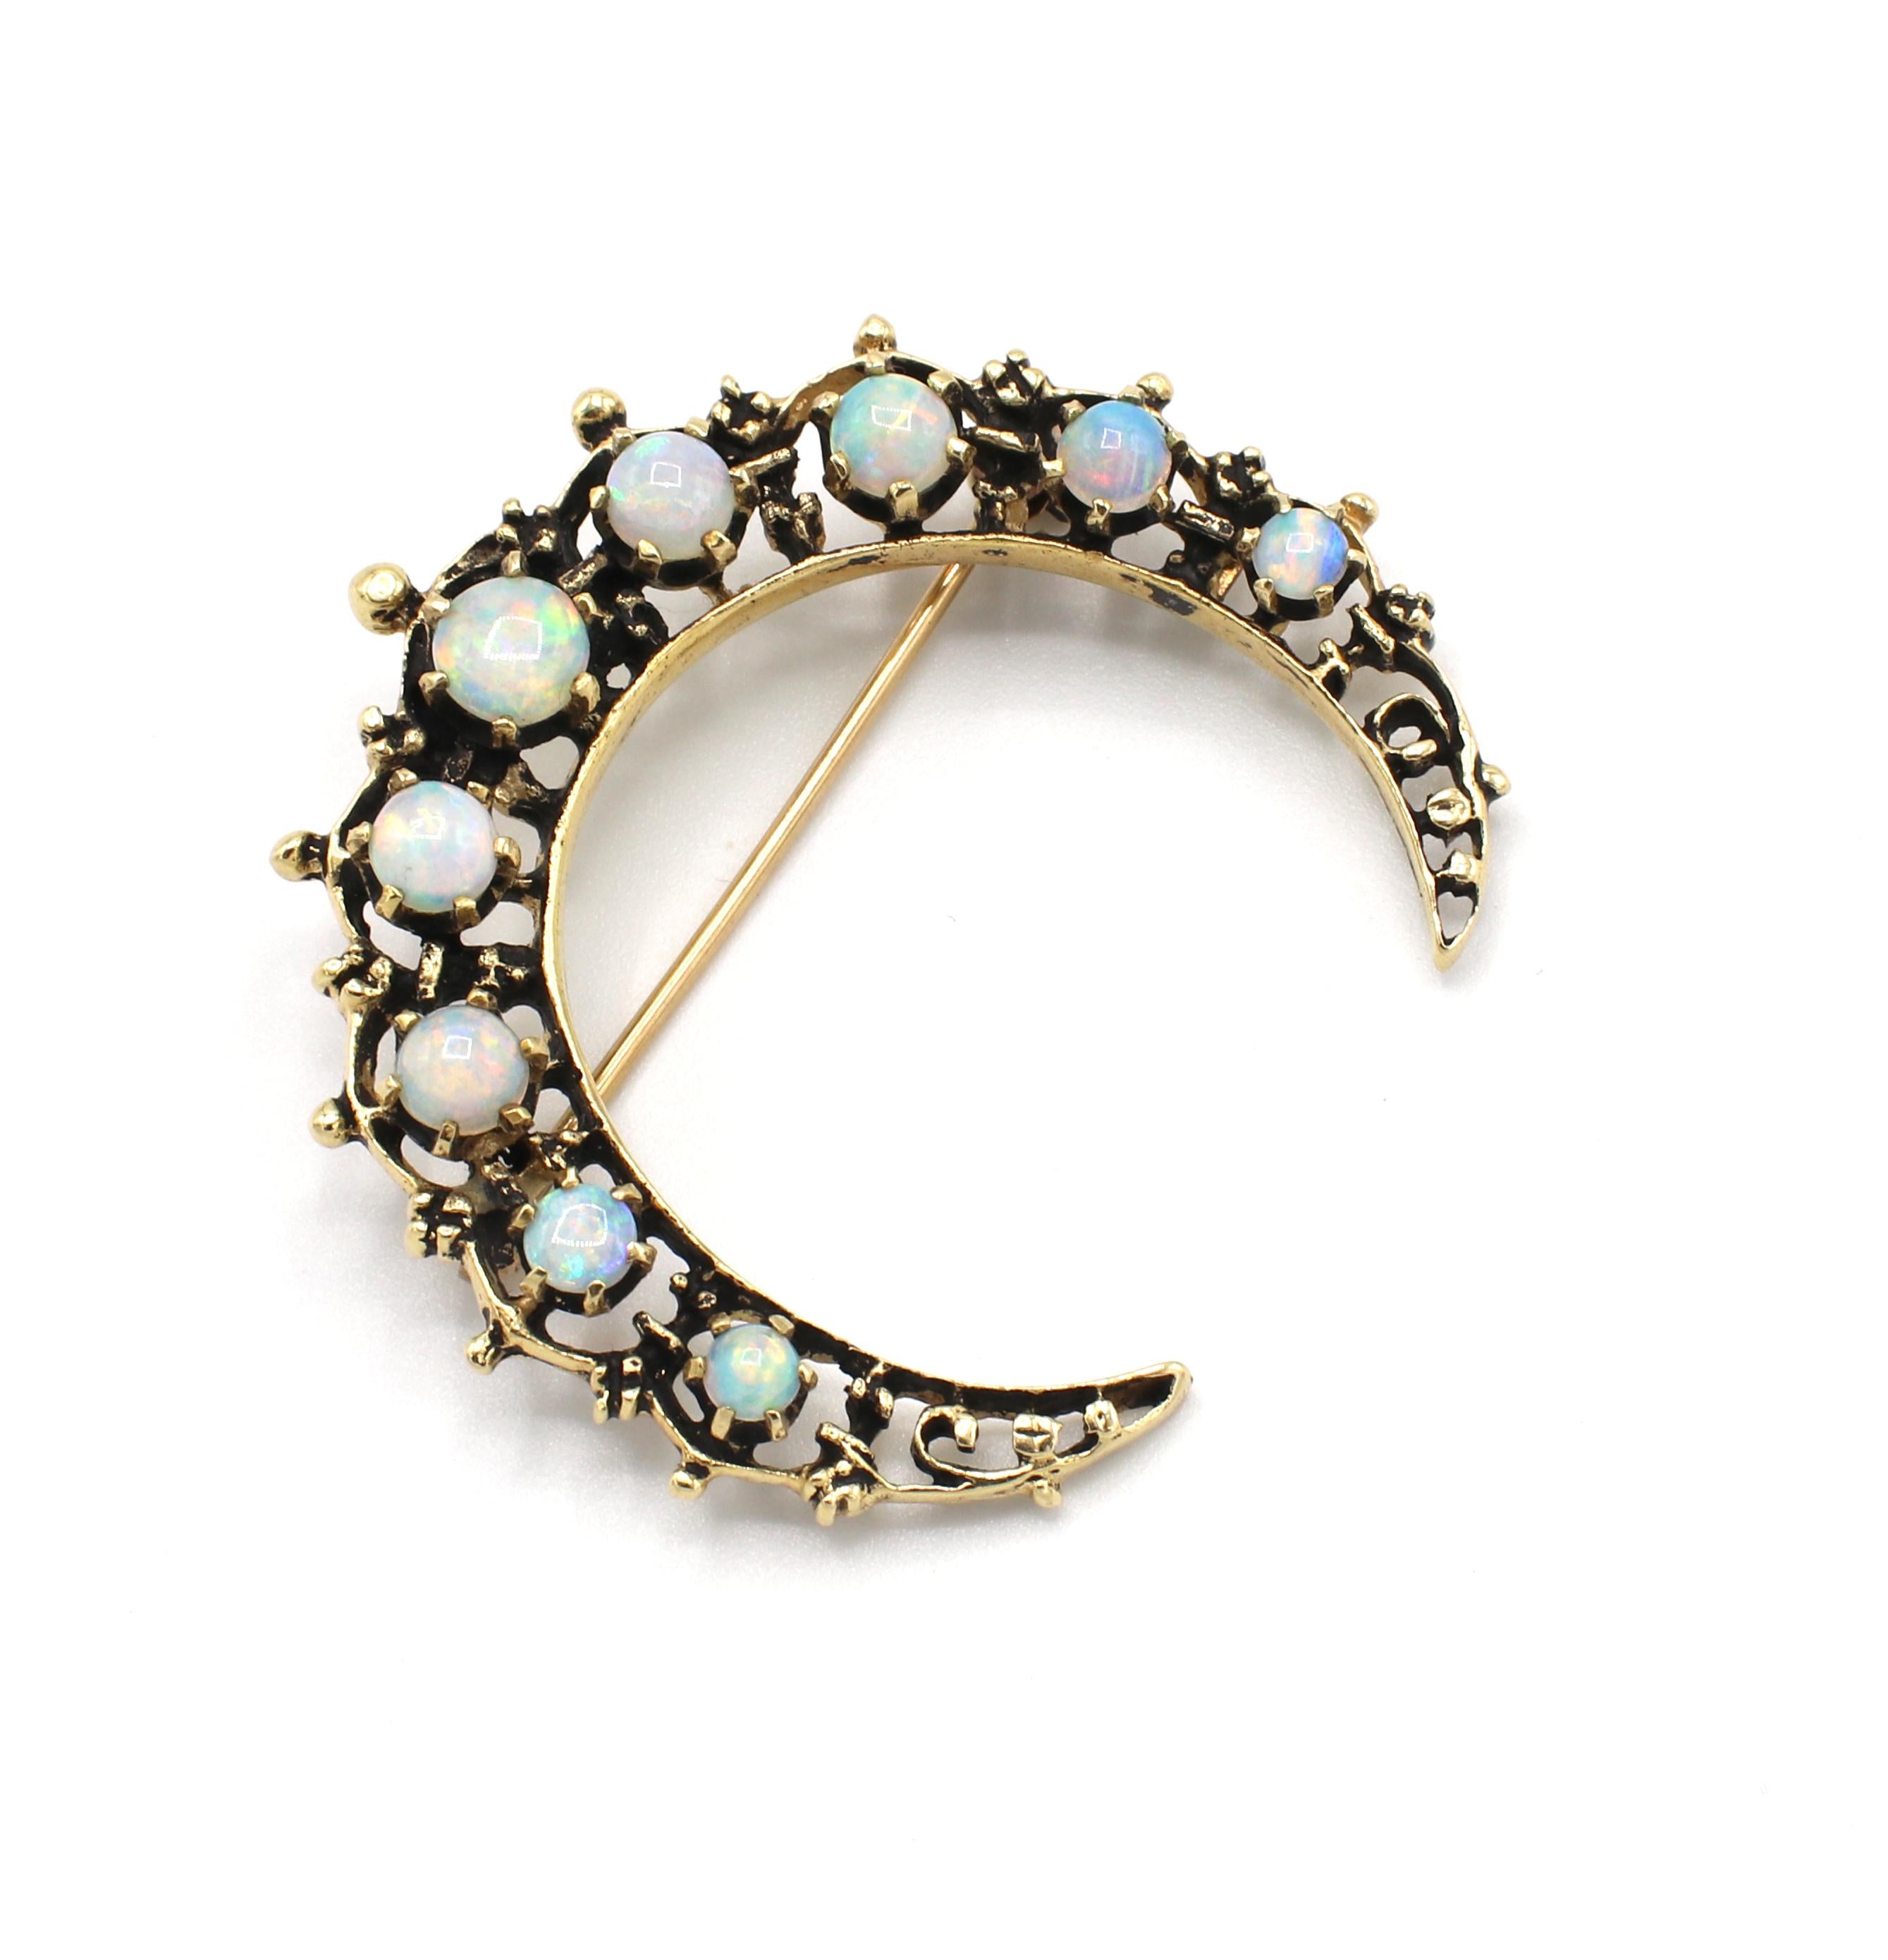 Antique 14K Yellow Gold Opal Cabochon Crescent Moon Brooch Pin
Metal: 14k yellow gold
Weight: 6.66 grams
Length: 36mm
Width: 34mm
